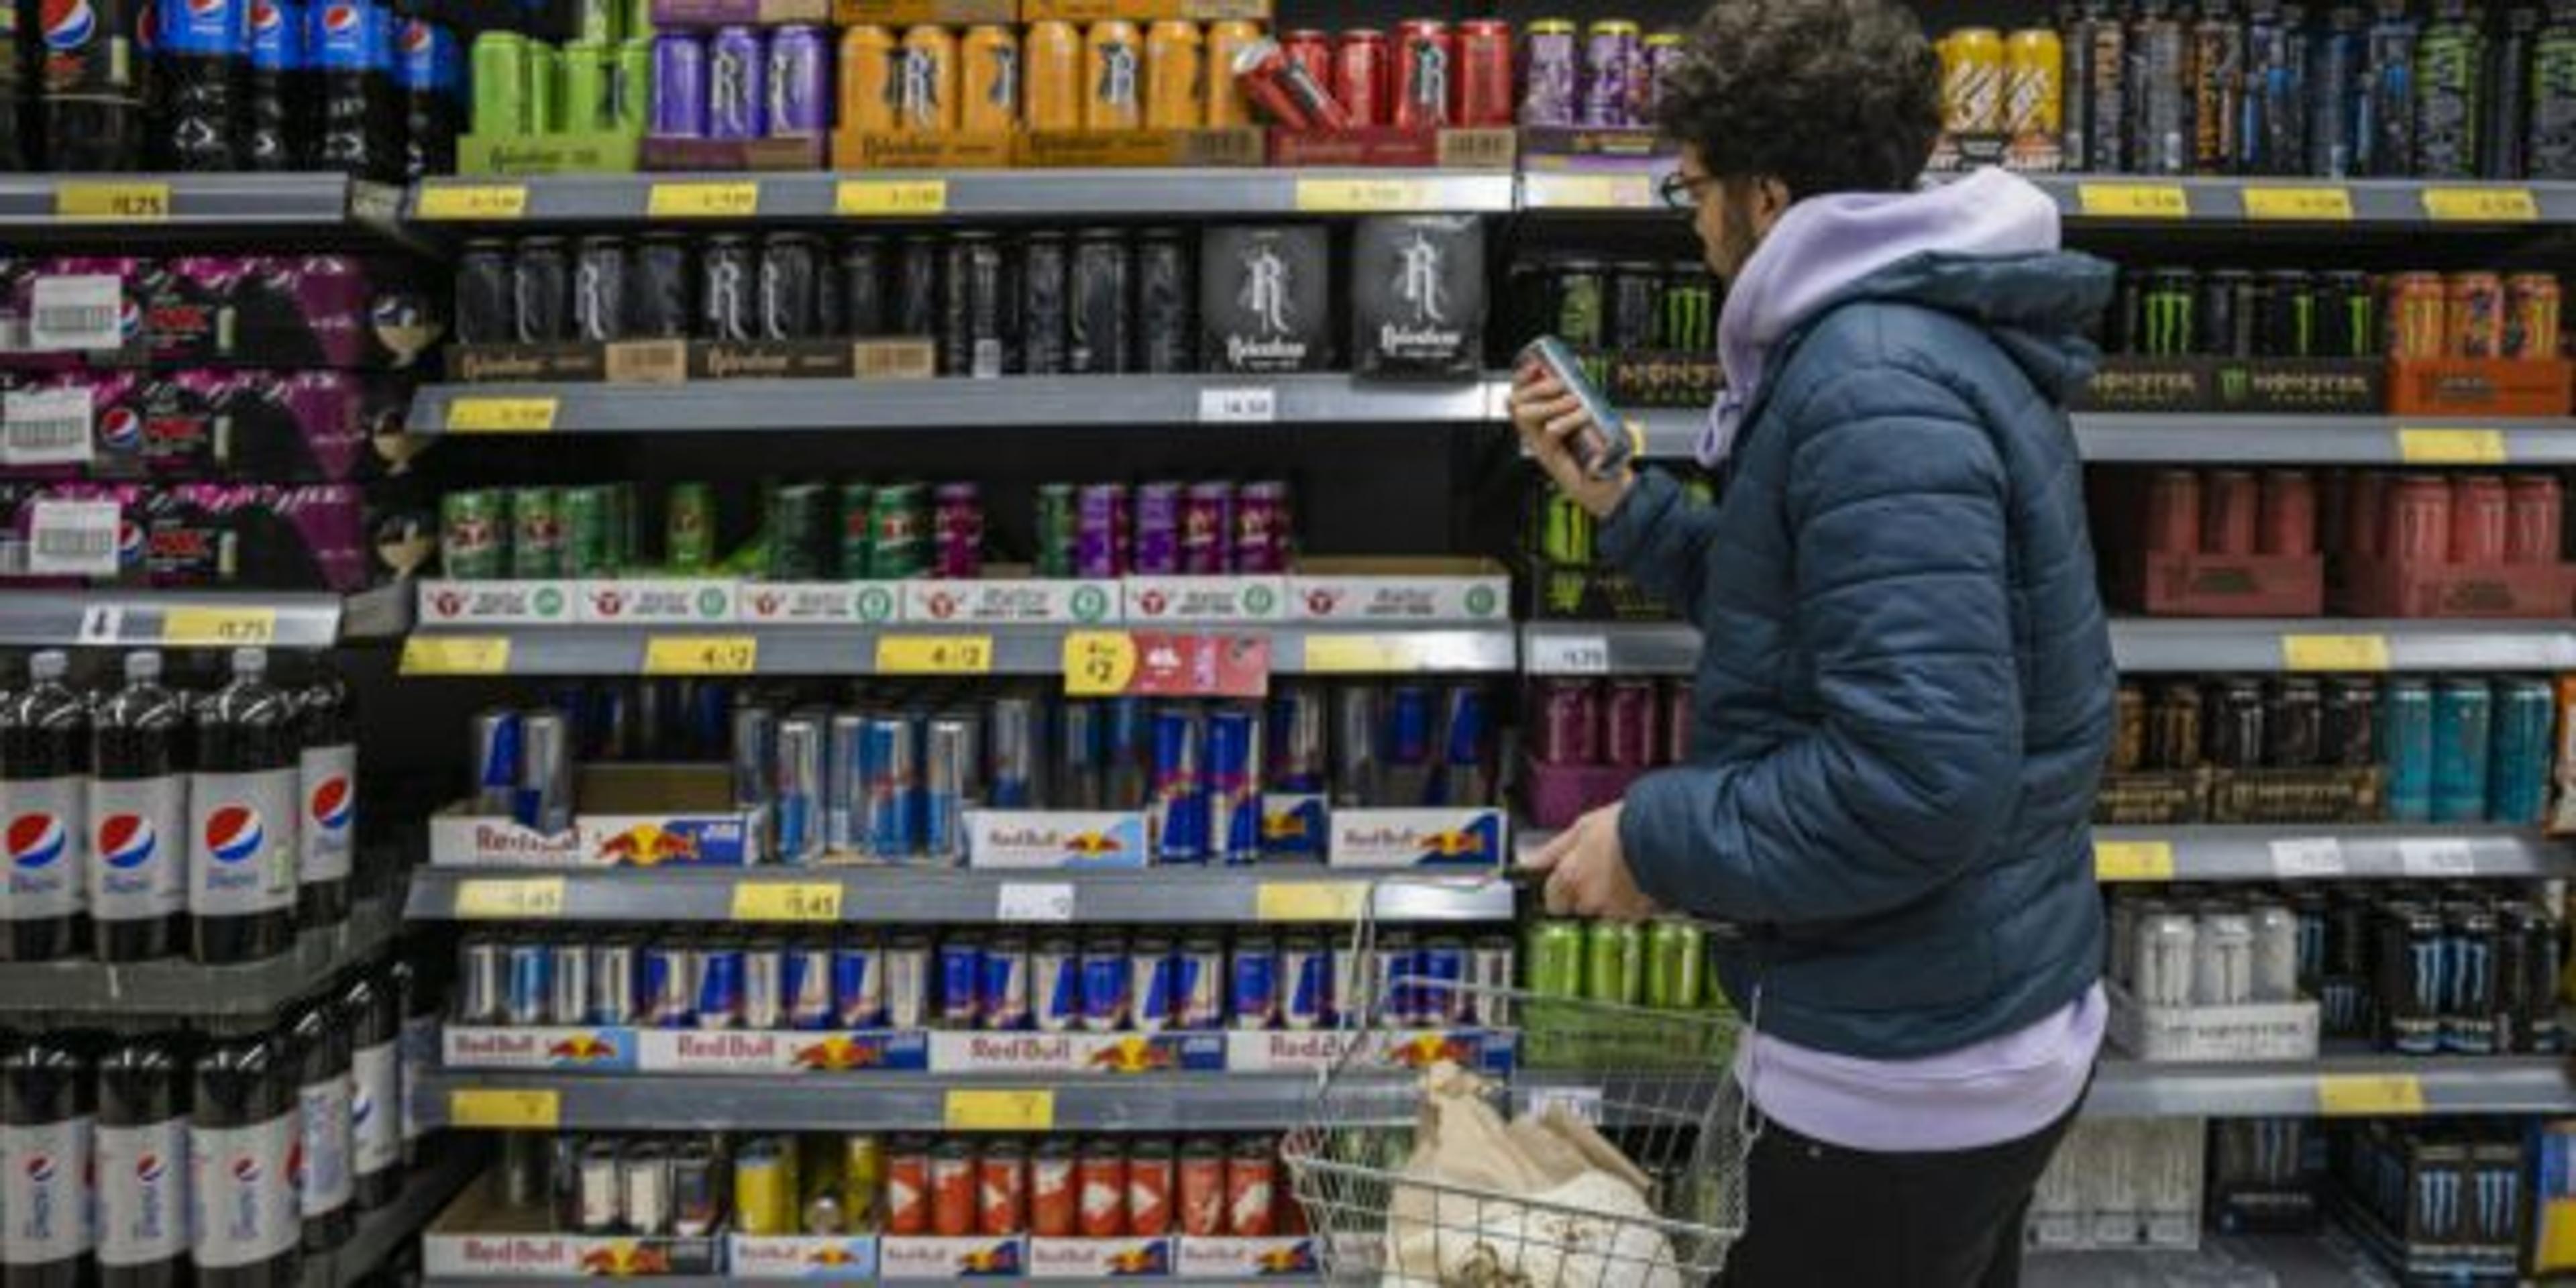 A man shops for energy drinks.